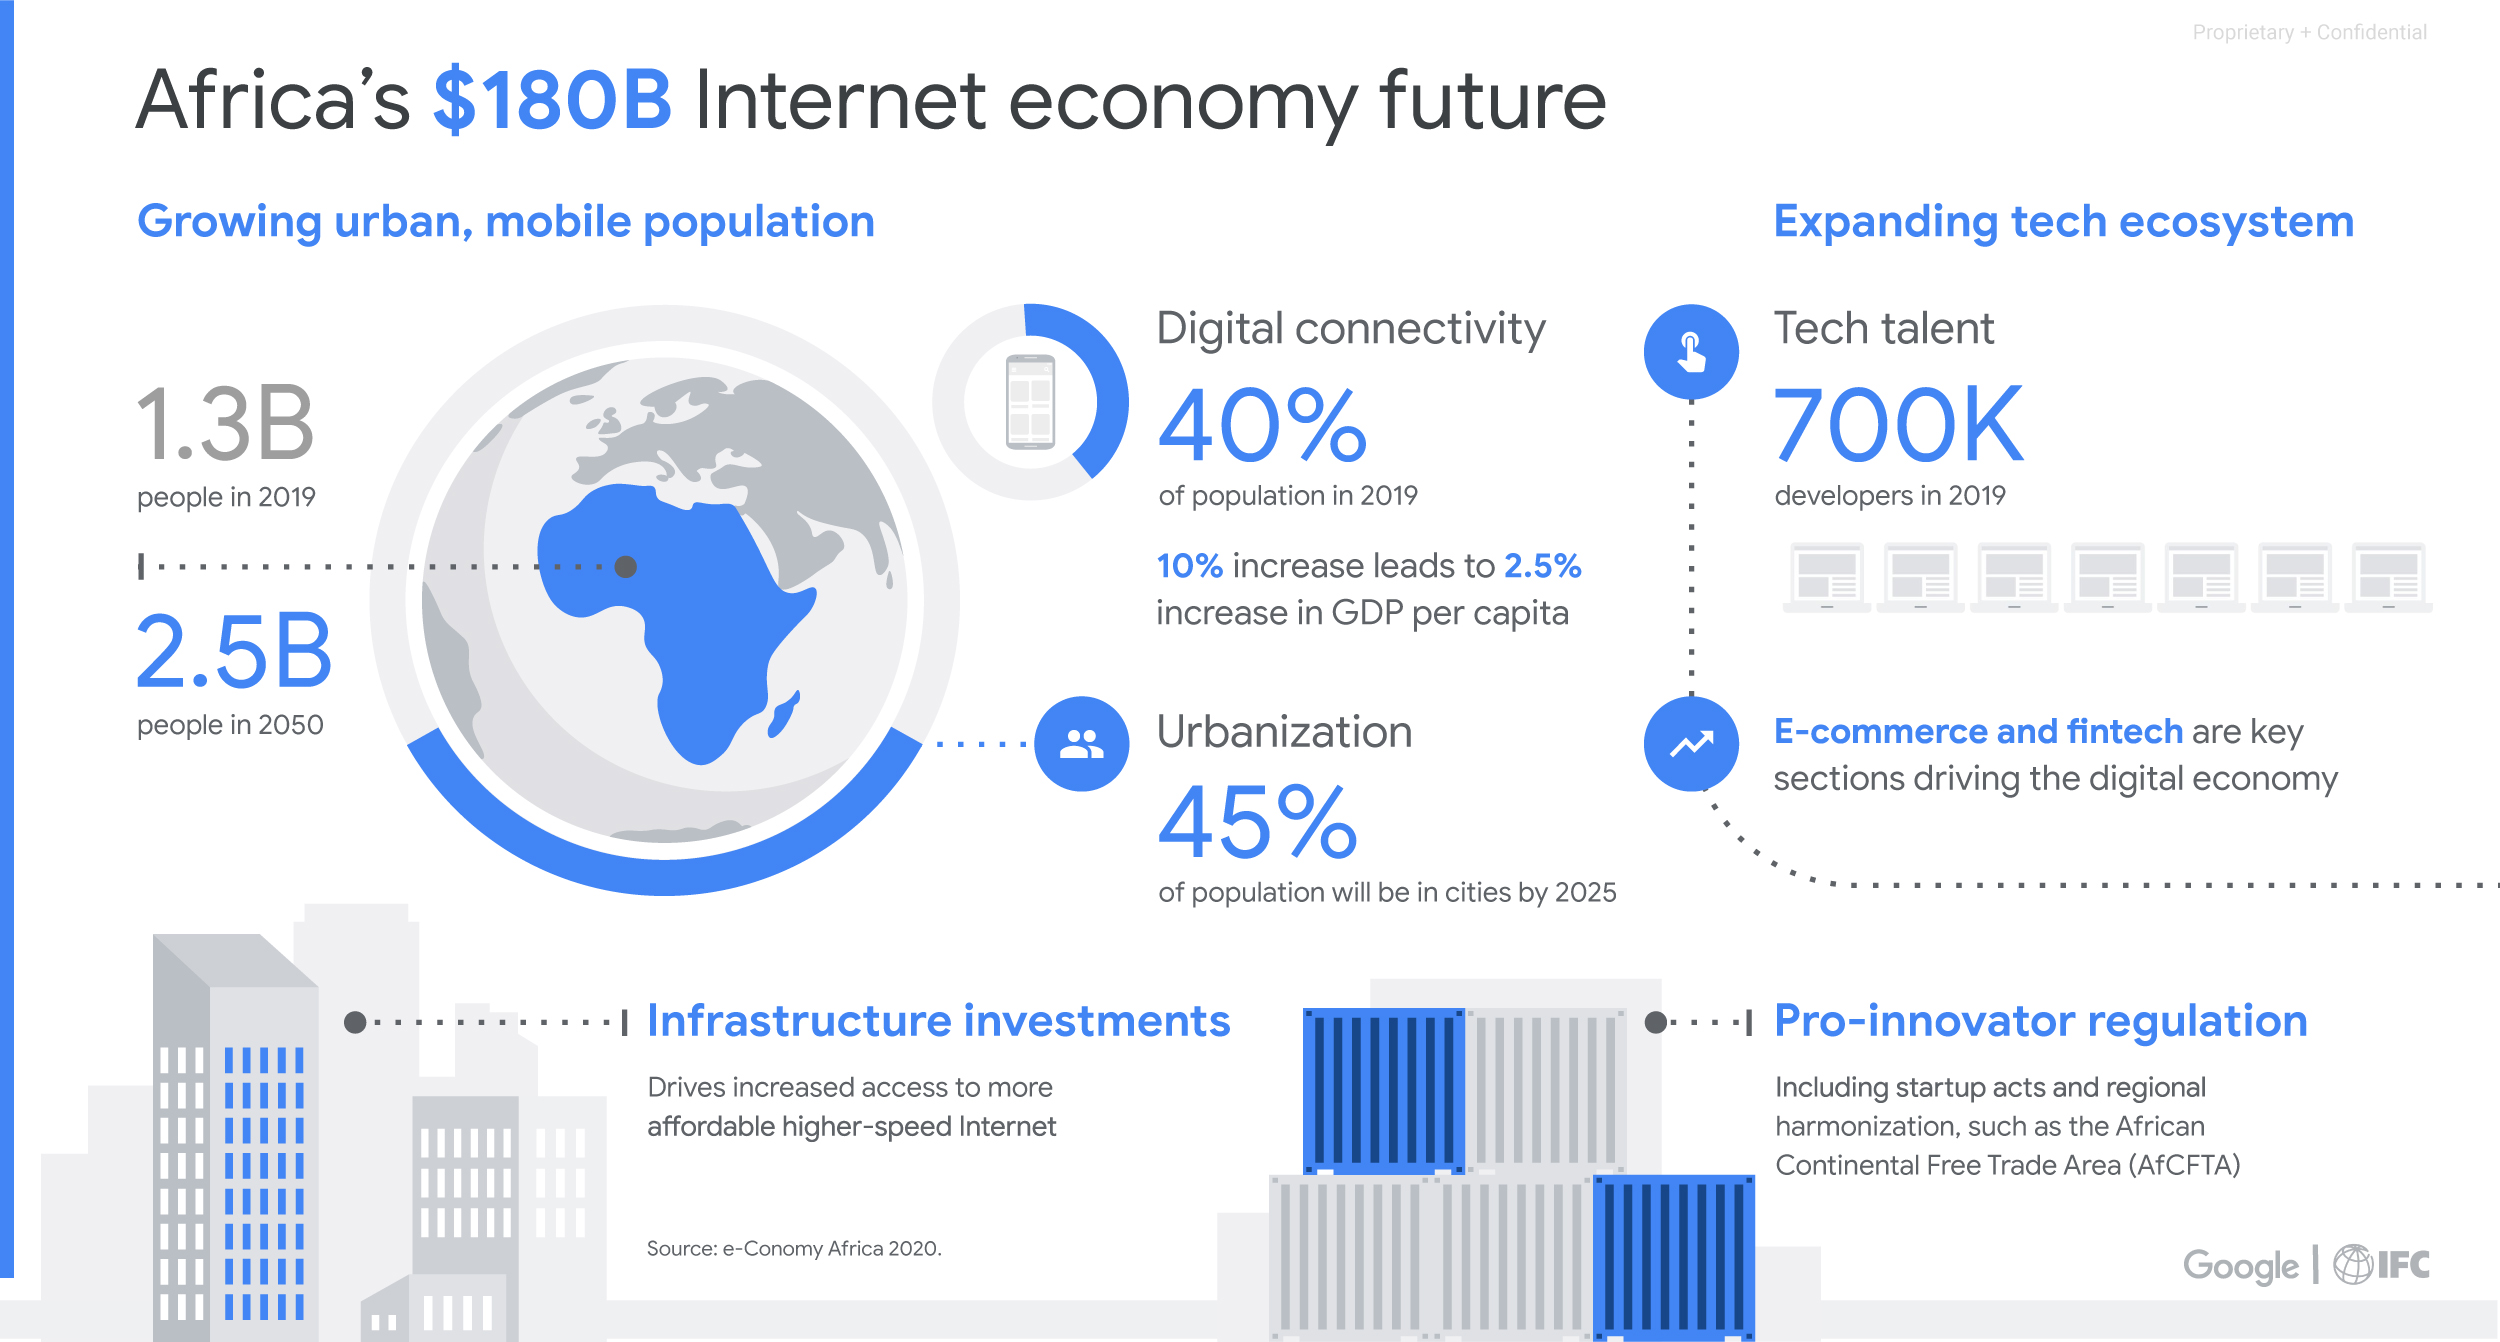 Africa's $180B Internet economy future

Growing urban, mobile population Expanding tech ecosystem

Digital connectivity © Tech talent

1.3B 40% 700K

 

people in 2019 of population in 2019 developers in 2019
cece hen. 10% increase leads to 2.5% :
5 5 B increase in GDP per capita : - - - - - - -
peoplein2050 SN WWI oO Urbanization oO E-commerce and fintech are key
o sections driving the digital economy
45% .
of population will be in cities by 2025 ® ® 4 6 5 8 8 0 8 ss 8 se ss 8 se 8 es 8 se se ss ss eo.
@ iii. I Infrastructure investments ®----| Pro-innovator regulation
Drives increased access to more Including startup acts and regional
affordable higher-speed Internet harmonization, such as the African

Continental Free Trade Area (AfCFTA)

Source: e-Conomy Africa 2020.

Google | GIFC